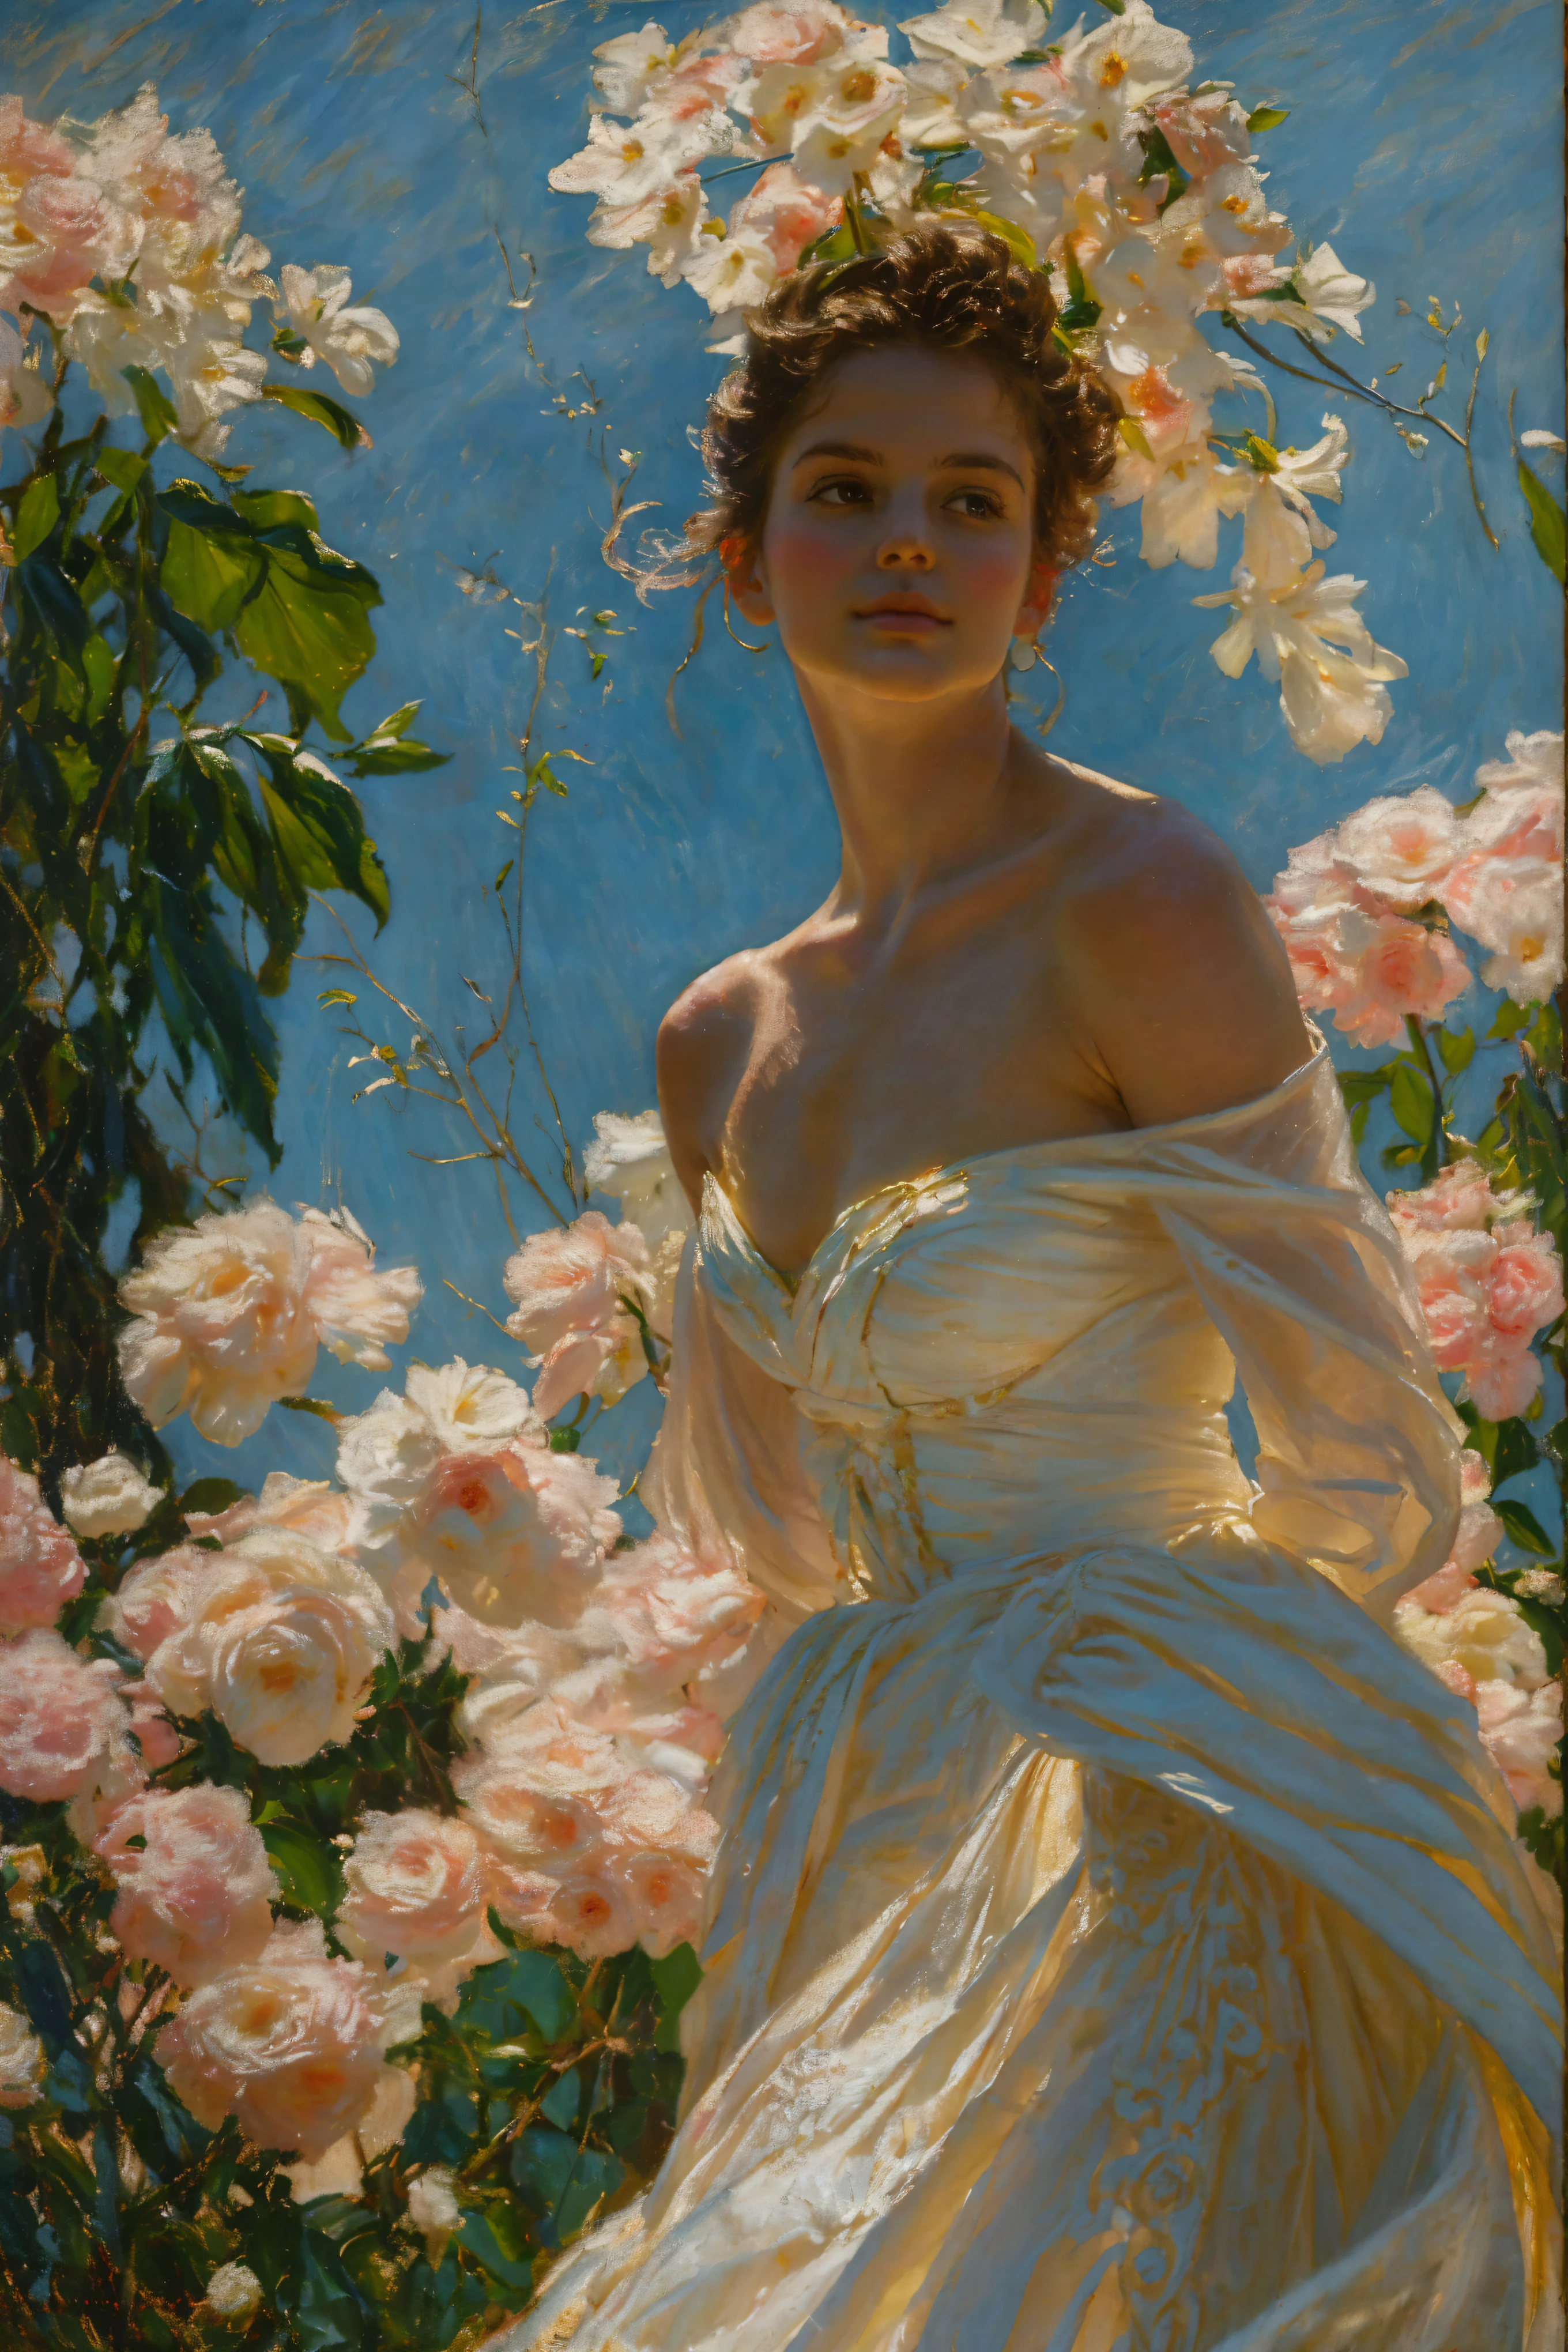 Create an image that captures the essence of classical art and award-winning painting, drawing inspiration from Monet oil paintings. Visualize a enchanting oil painting of beautiful female in a flower garden. Her skin should be meticulously detailed, with eyes that glow with life, and a facial structure that fits the golden ratio of attractiveness, including clear double eyelids and perfectly applied lip gloss on pale lips. | She is dressed in an elegant summer outfit, and she is moving with a dynamic and bold grace. The setting is a seren flower garden, with her poised under the warm light of sunlight, casting striking shadows around her. Capture her from a low angle to reveal her whole body in a dynamic pose, adding to the intensity of the scene. She looks dreamily into the distance, her expression both engaging and ethereal. |  Rendered in ultra-high detail and quality, this masterpiece ensures anatomical correctness and textured skin with super detail. With a focus on high quality and accuracy, this award-winning portrayal captures every nuance in stunning 16k resolution, immersing viewers in its lifelike depiction. | ((elegant summer outfit):1.1), ((fancy handgloves):1.1) | (((anatomical correctness))), (((perfect_fingers))), (((perfect_legs))), (((perfect_hands))), ((perfect_composition, perfect_design, perfect_layout, perfect_detail, ultra_detailed)), ((enhance_all, fix_everything)), More Detail, Enhance.